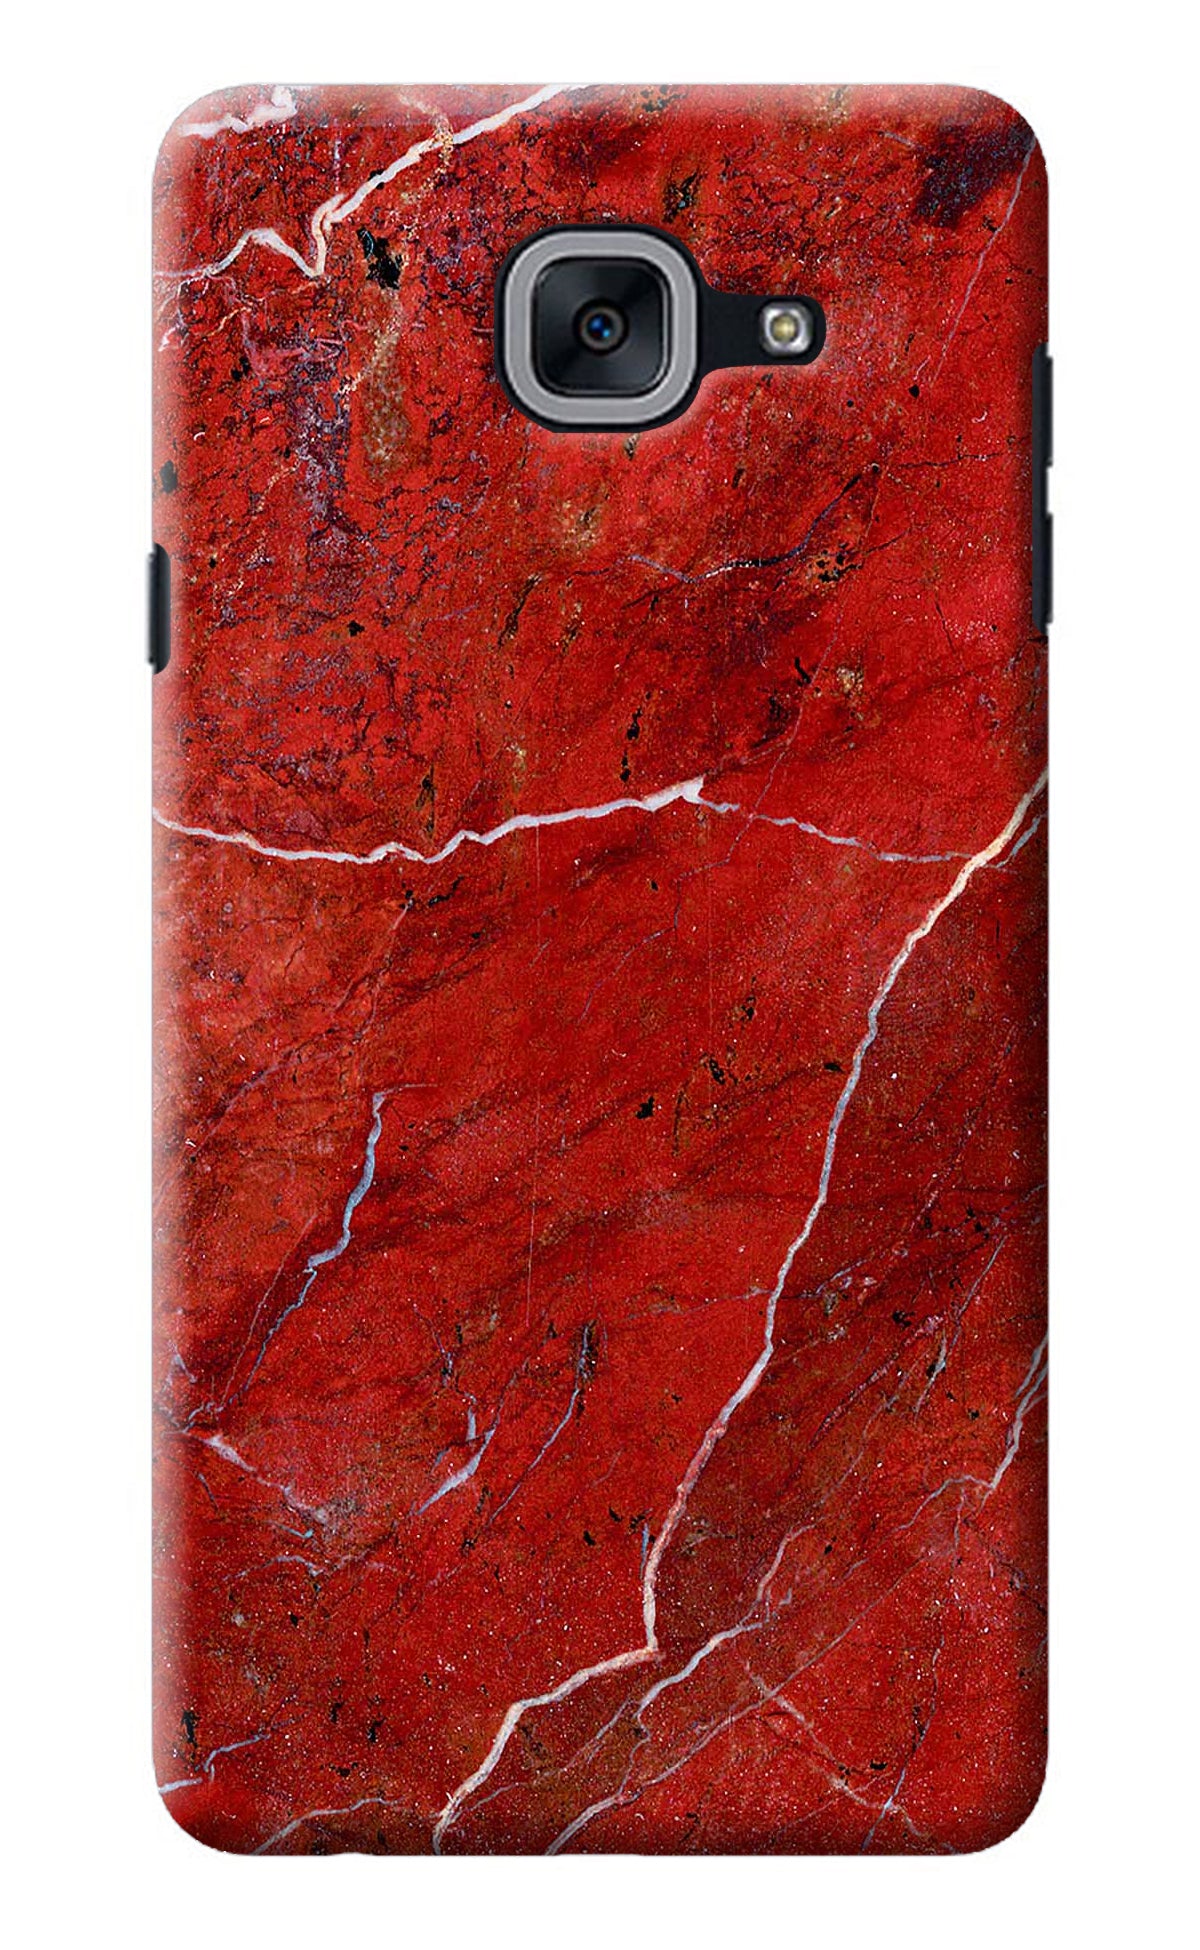 Red Marble Design Samsung J7 Max Back Cover